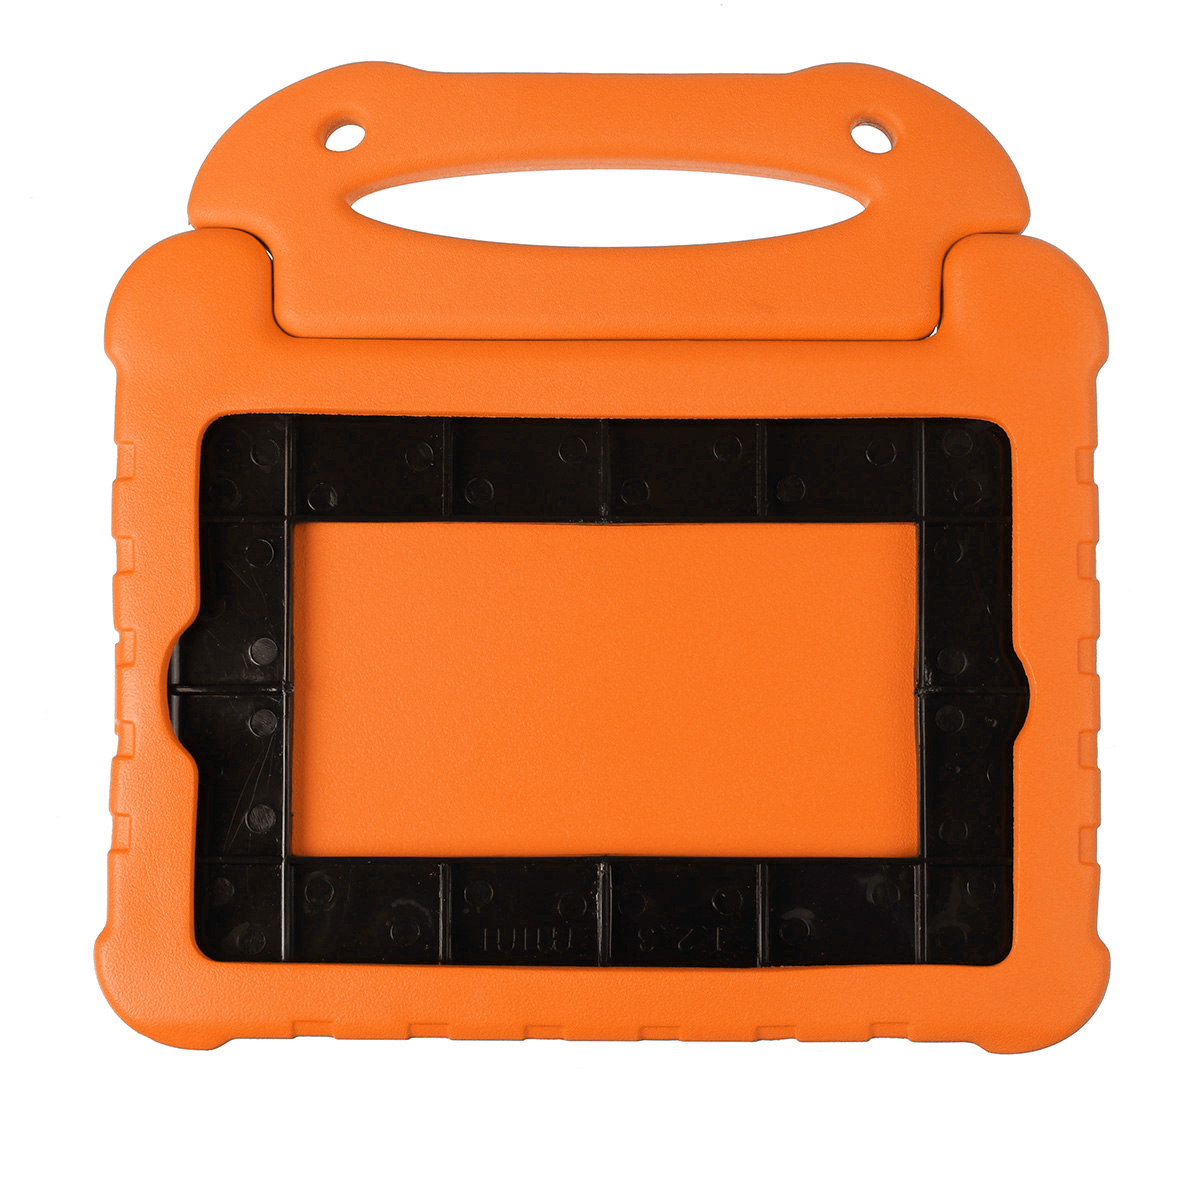 Portable-Kids-Friendly-Safe-EVA-with-Handle-Bracket-Stand-Tablet-Shockproof-Protective-Case-for-iPad-1777875-2